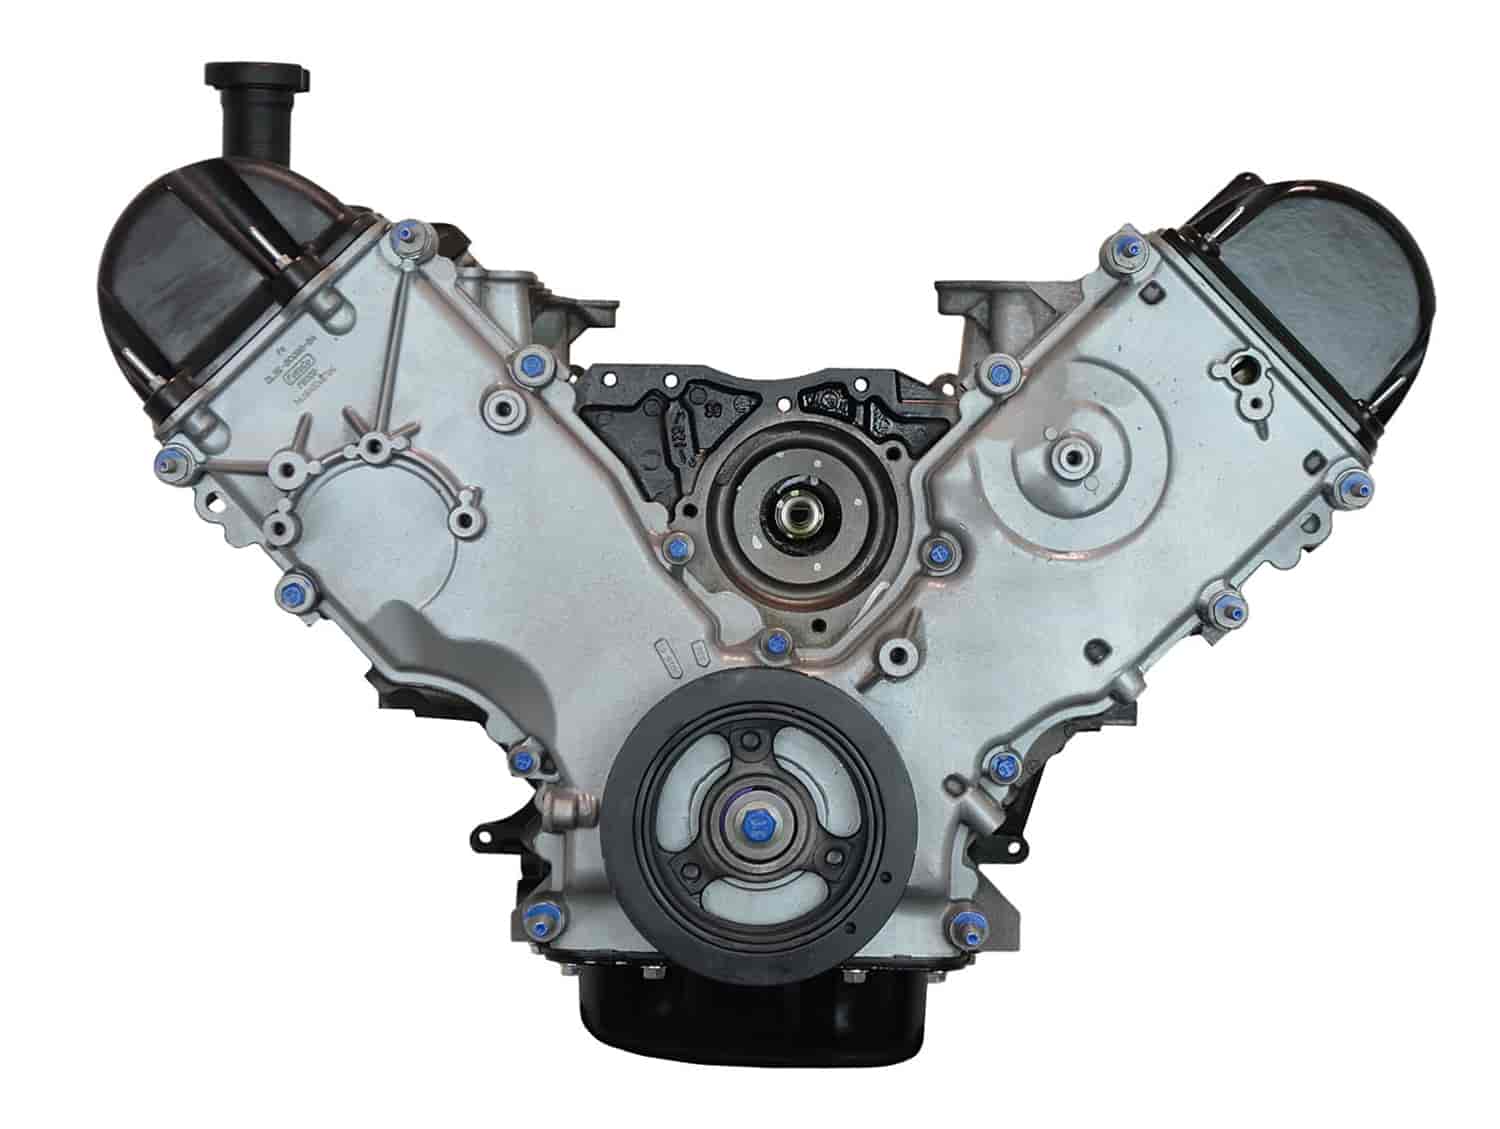 Remanufactured Crate Engine for 2002-2008 Ford E-Series Van with 5.4L V8